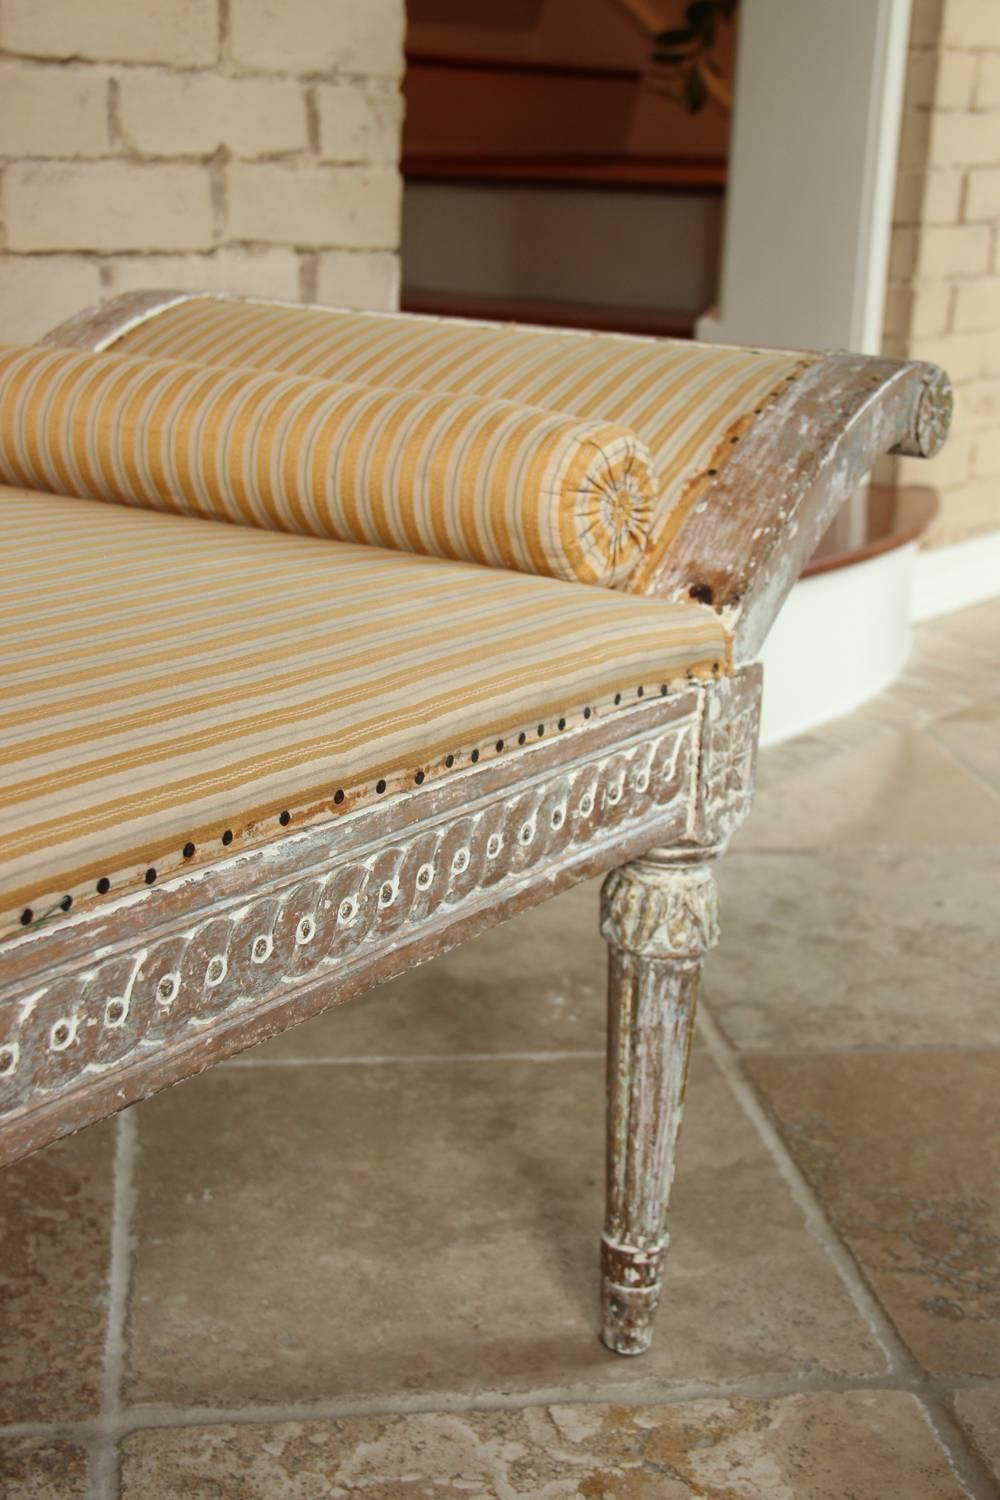 A rare Swedish Gustavian reclaimer or daybed, circa 1870, in original time worn patina. Three sides feature carved guilloché detail and the round, tapered legs are accented by carved rosettes and acanthus leaves. An exceptional Recamier that would